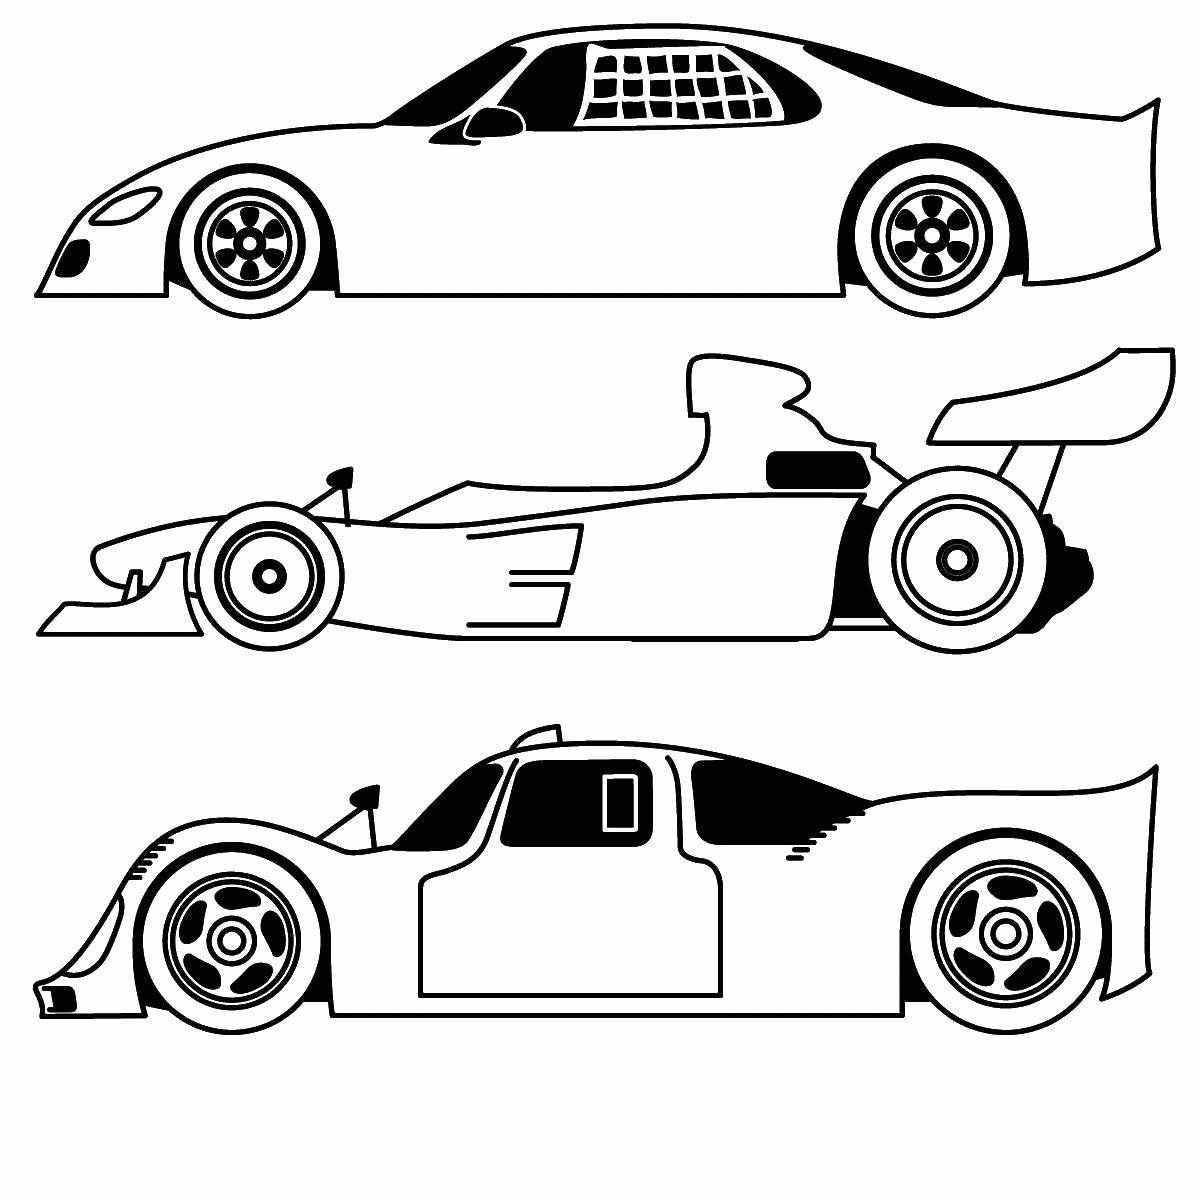 Coloring page of a bright racing car